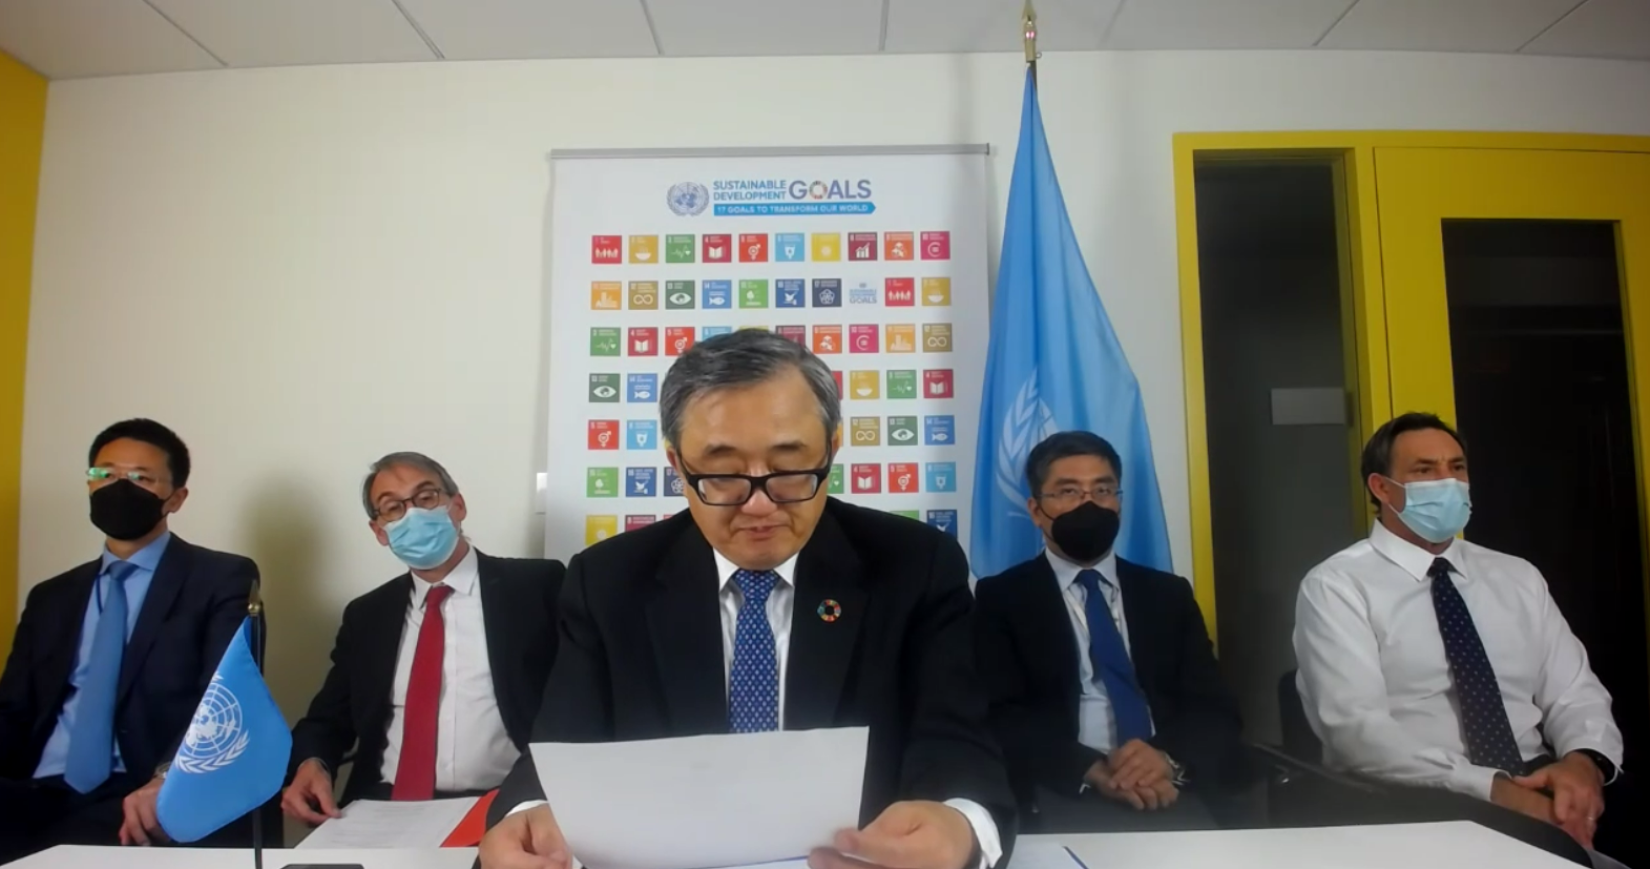 Under-Secretary-General of the UN Department of Economic and Social Affairs Liu Zhenmin delivering the Secretary-General's congratulatory message